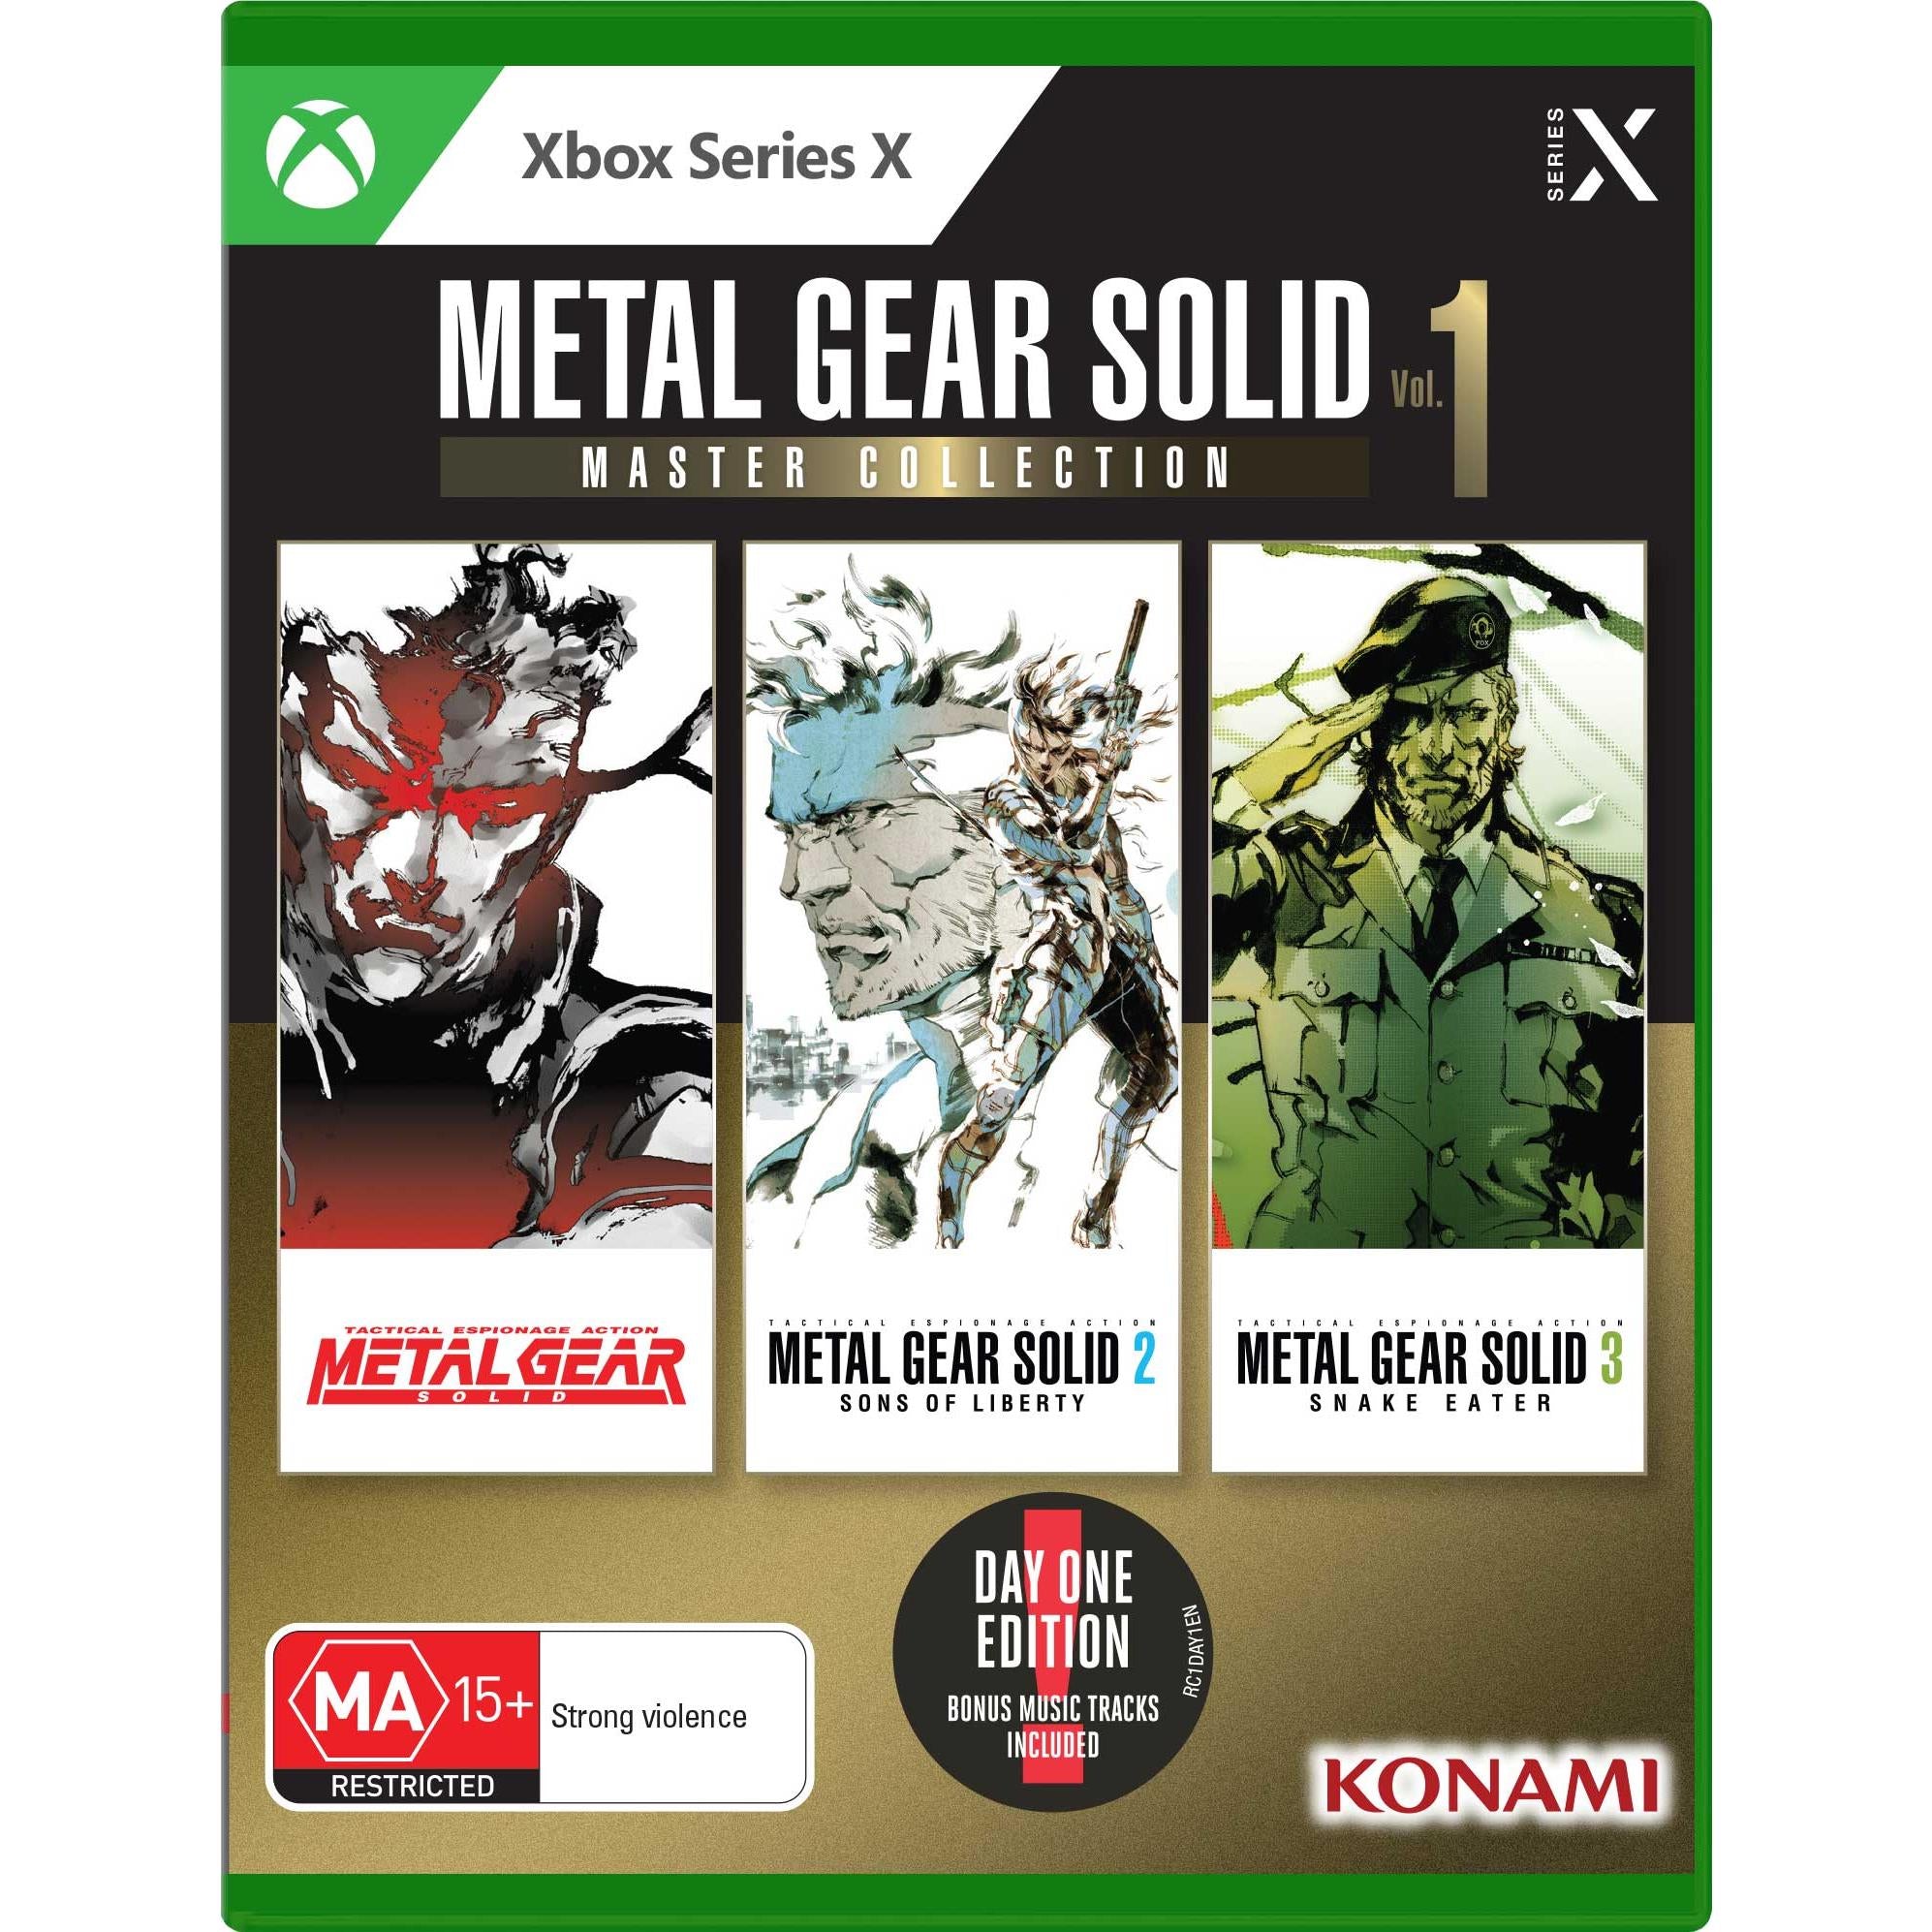 metal gear solid: master collection vol. 1 day 1 edition